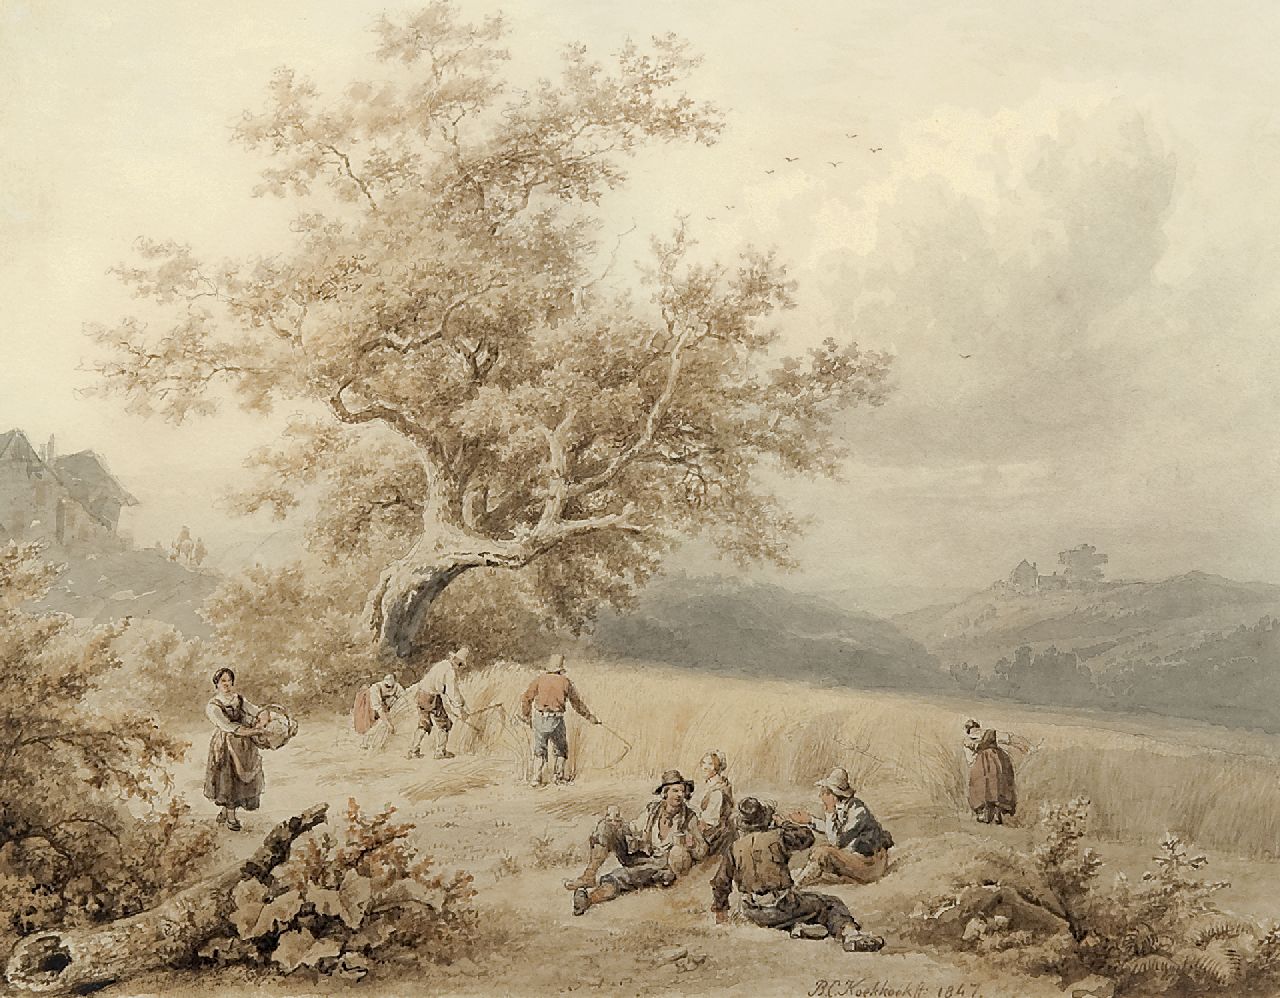 Koekkoek B.C.  | Barend Cornelis Koekkoek | Watercolours and drawings offered for sale | Harvest time, Luxemburg, ink and watercolour on paper 19.6 x 24.9 cm, signed l.c. and dated 1847